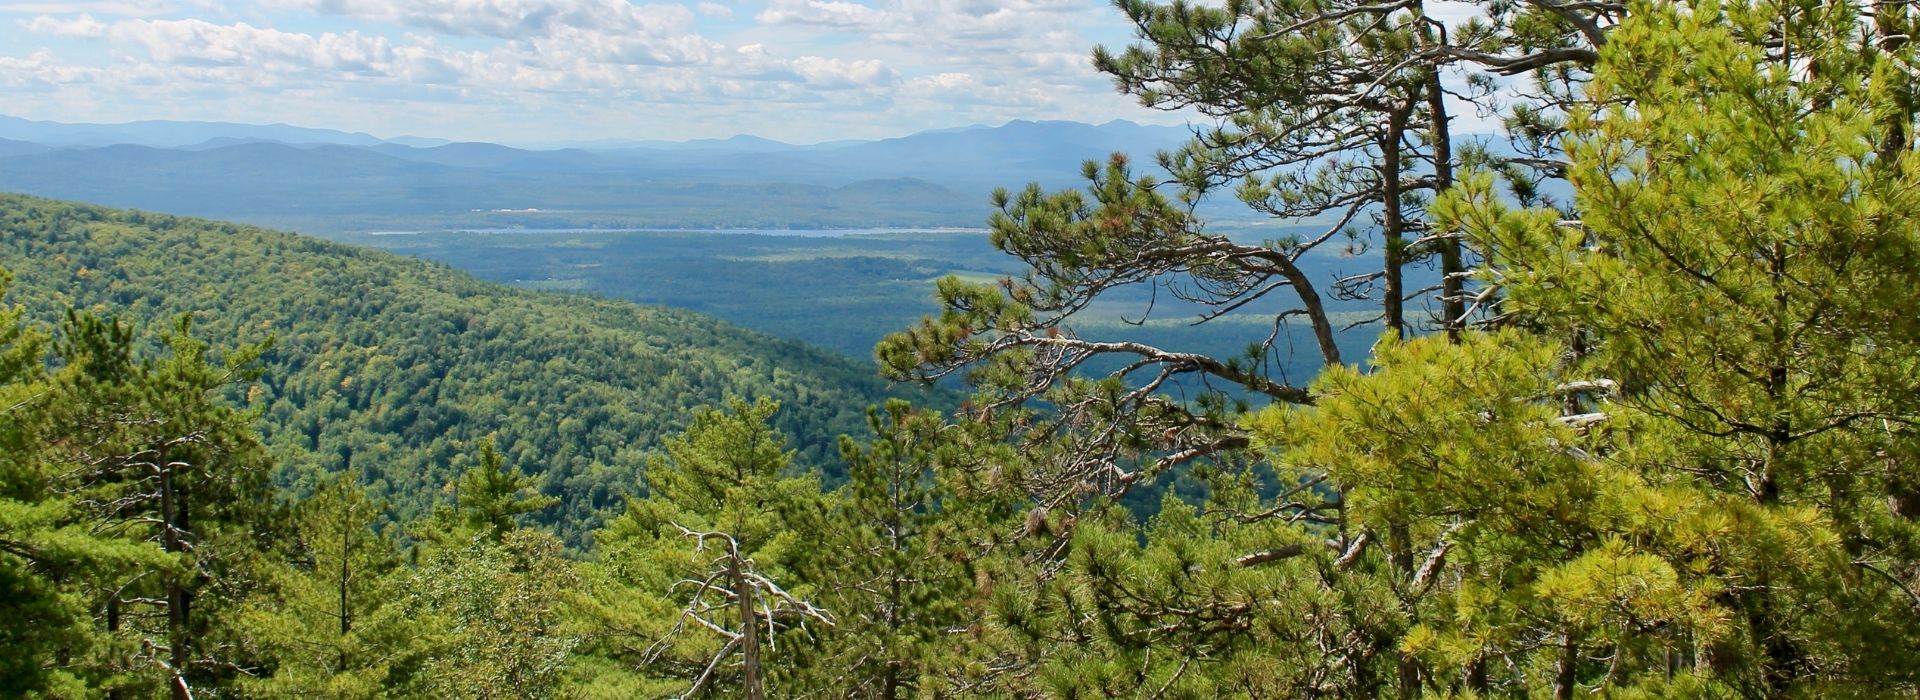 a view of green mountains in the distance from a hiking trail in maine